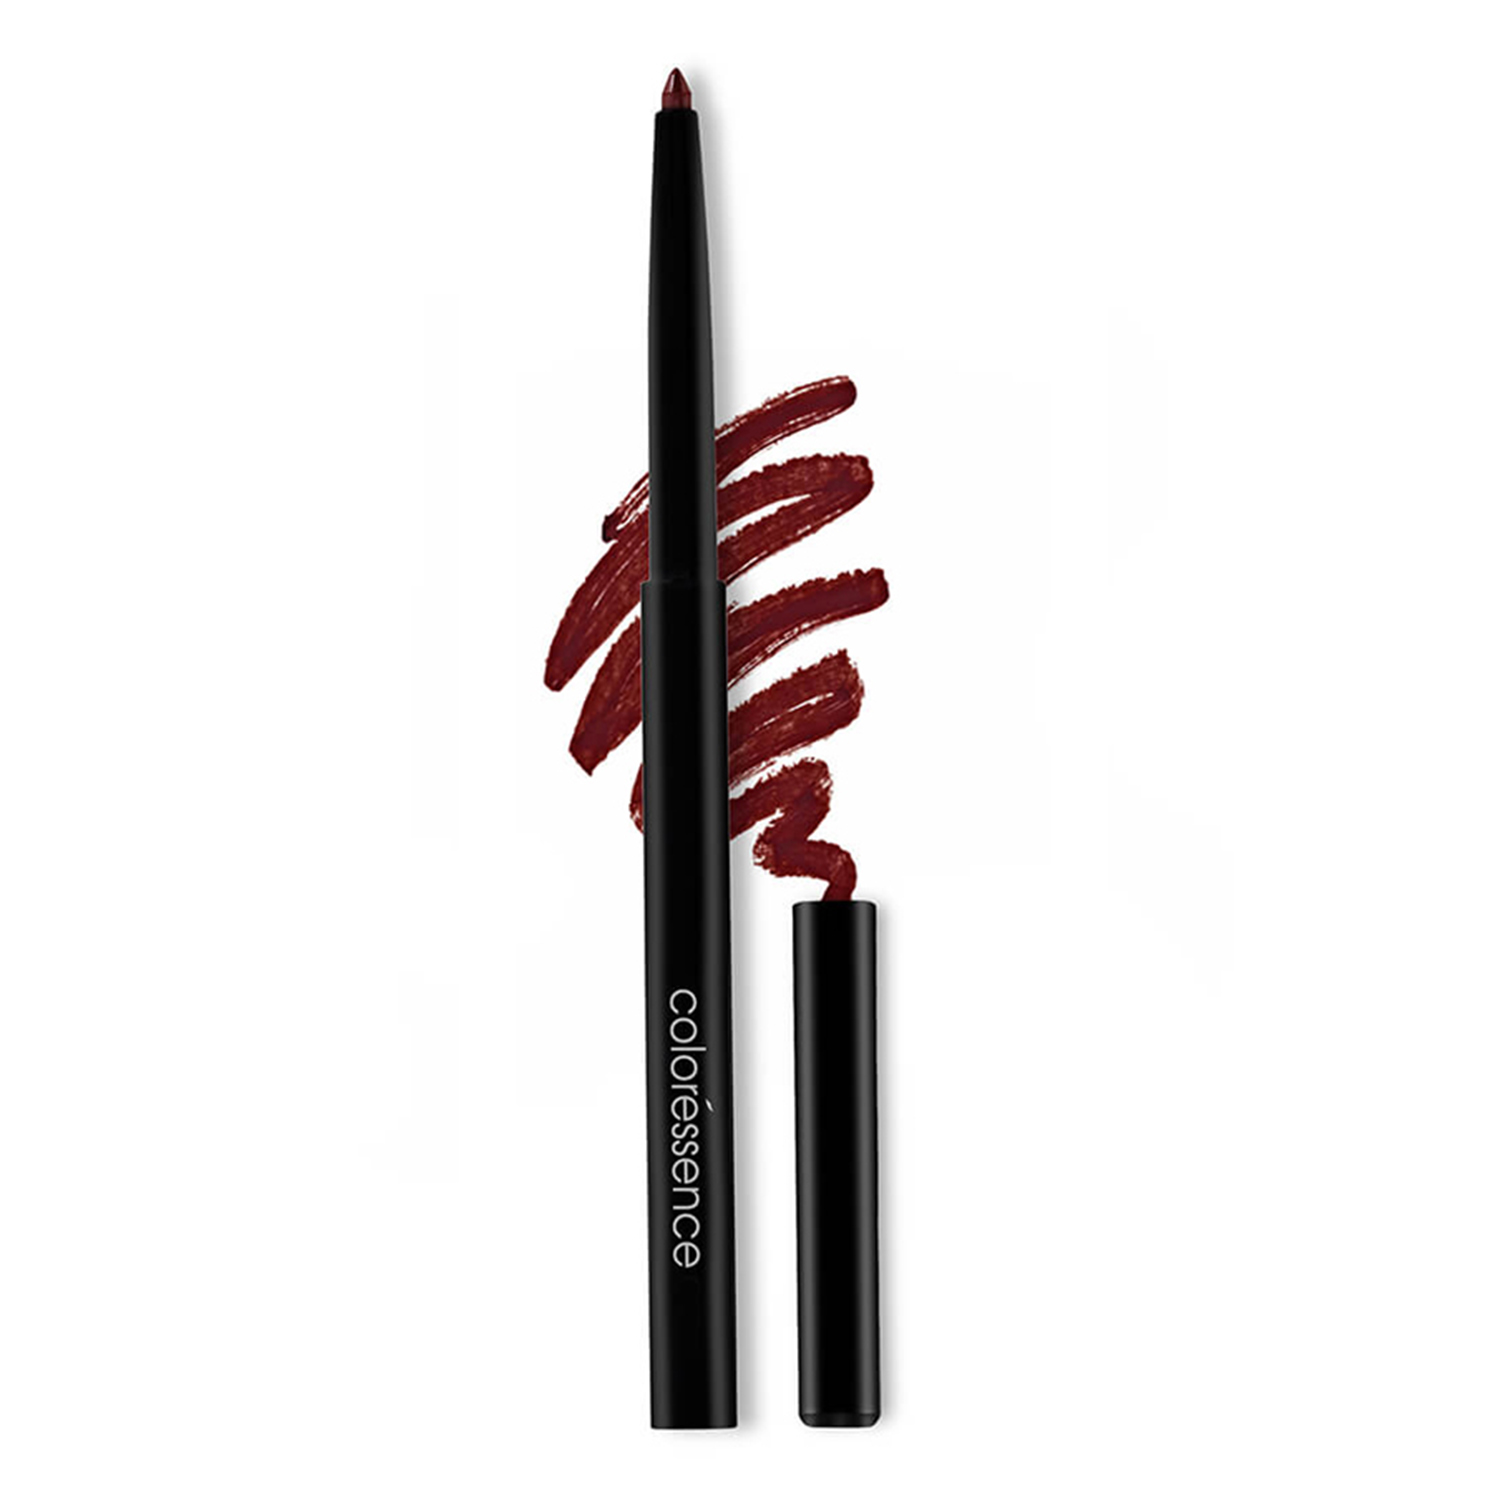 Coloressence Long Stay Smudge Free Water Proof Creamy Definer Lip Liner Pencil, Glossy Finish, 0.25gm-01 Maroon